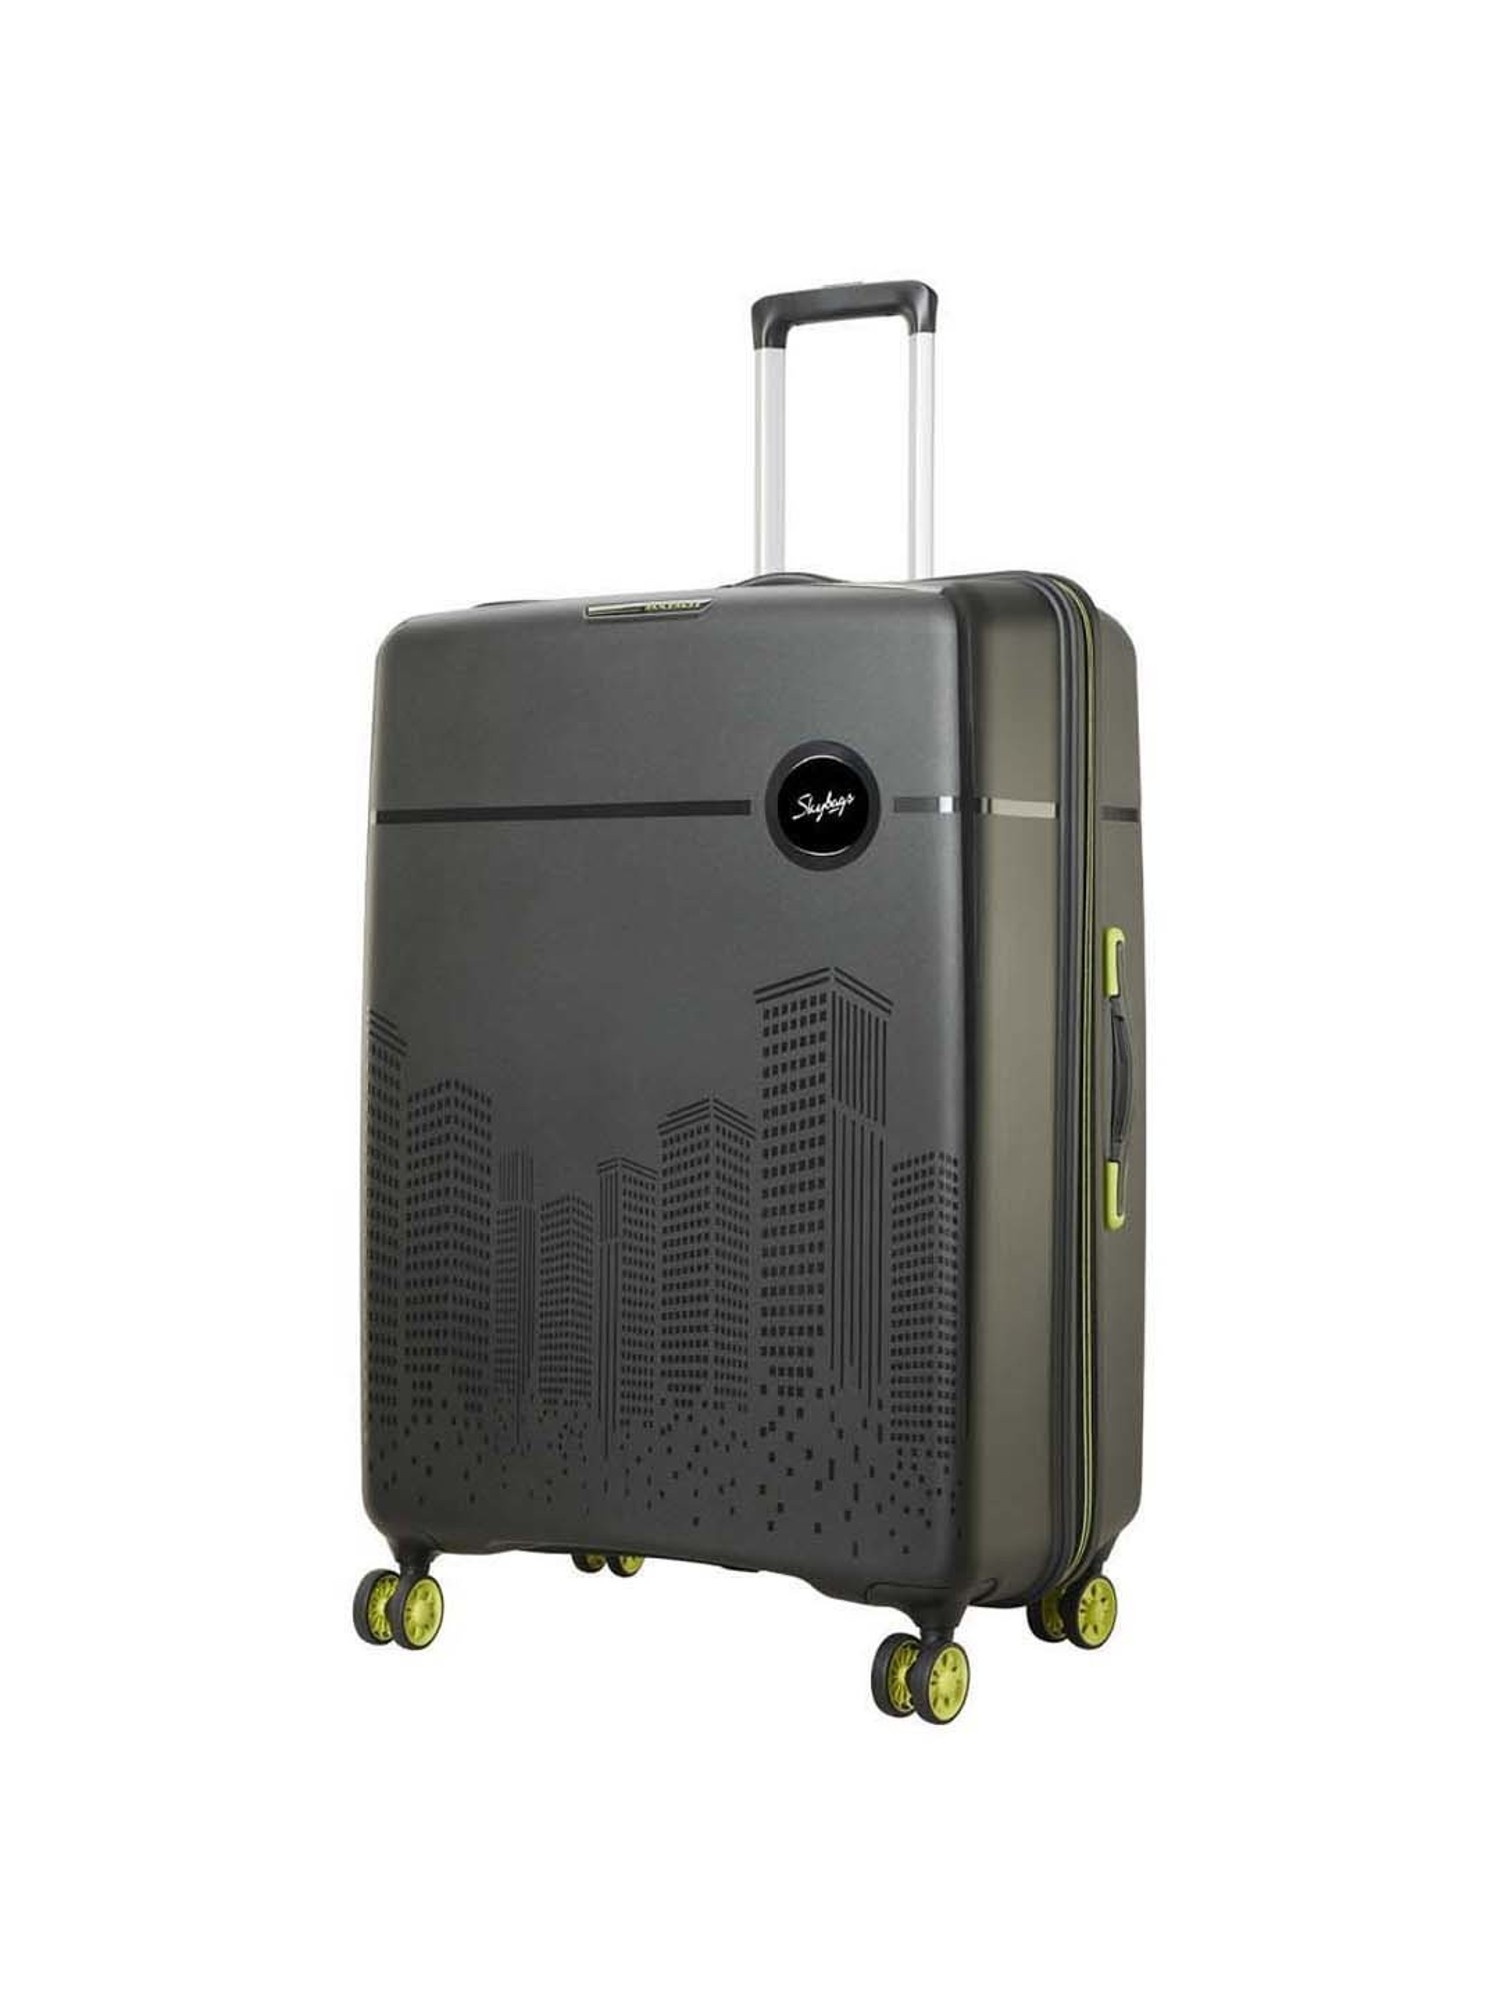 SKYBAGS OSCAR STROLLY 69 360* AST (MASH UP) Check-in Suitcase - 28 inch  Light Blue - Price in India | Flipkart.com